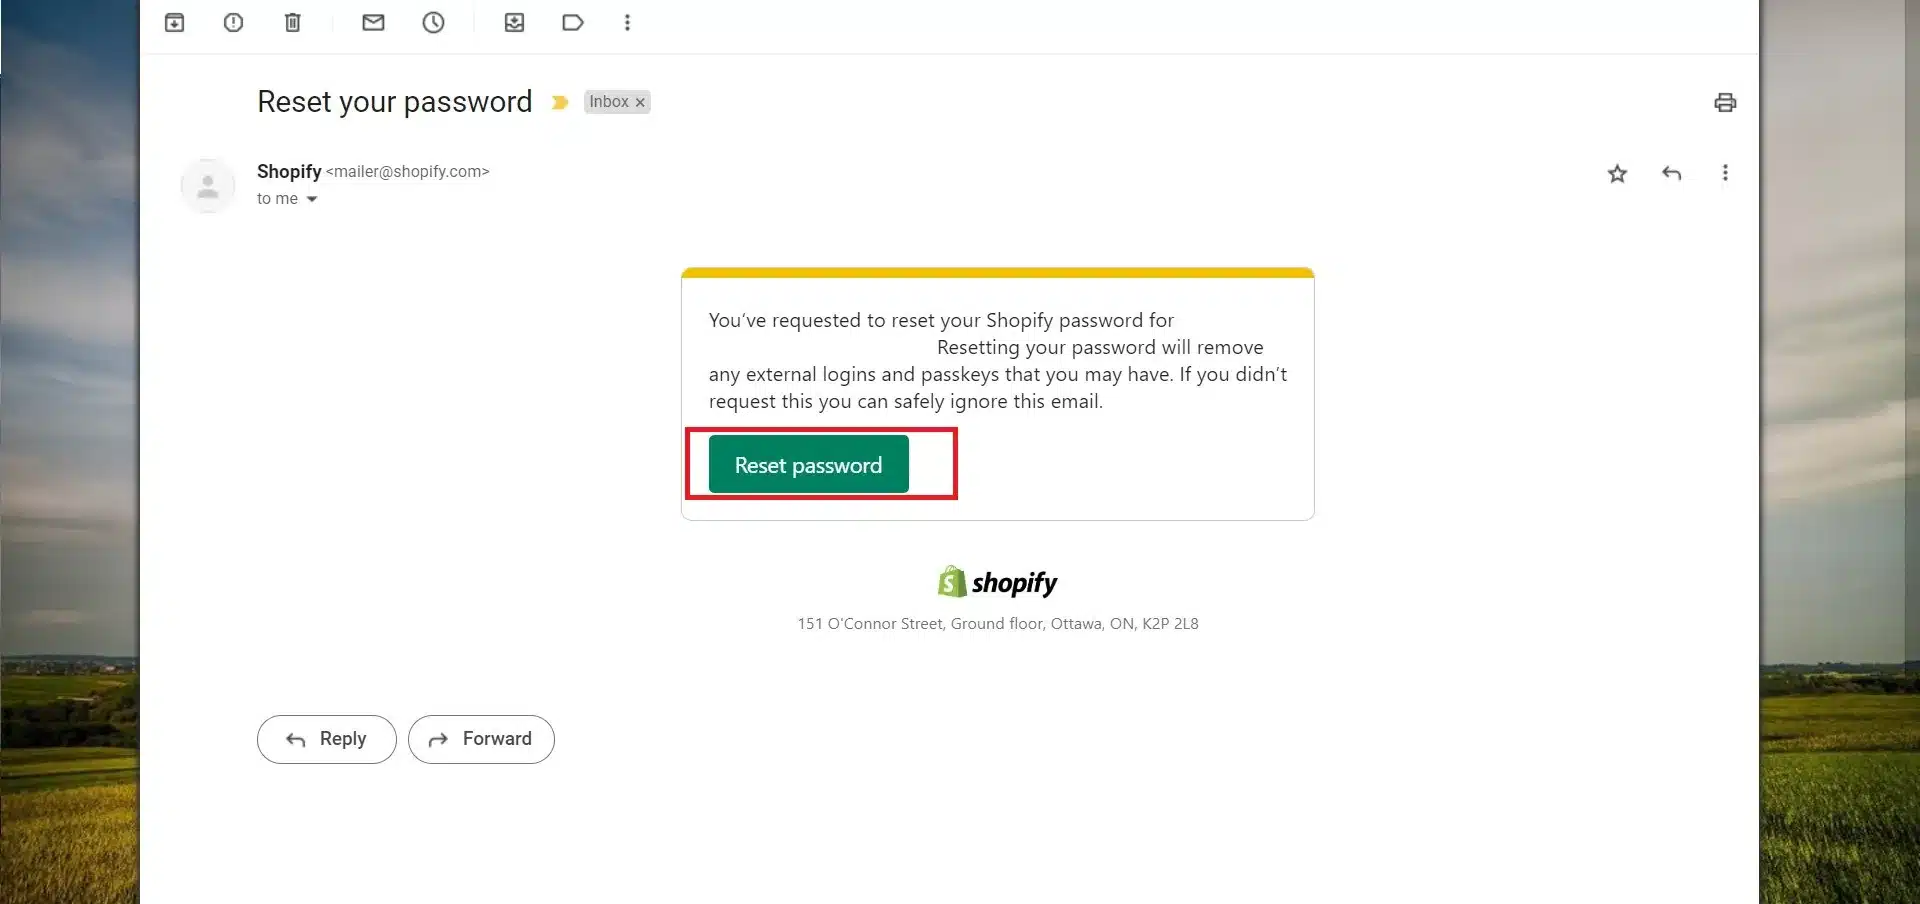 An email with a link to reset your password